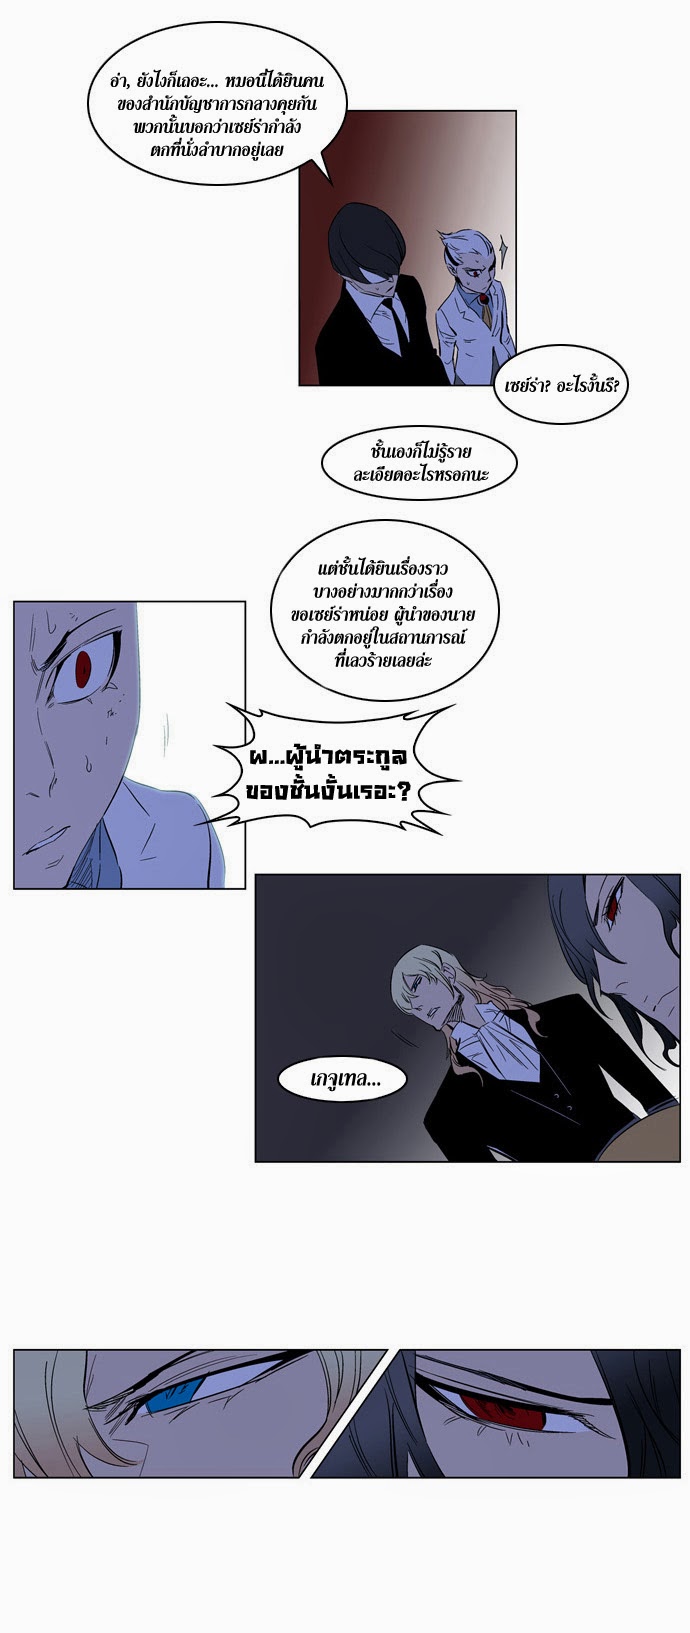 Noblesse 180 018